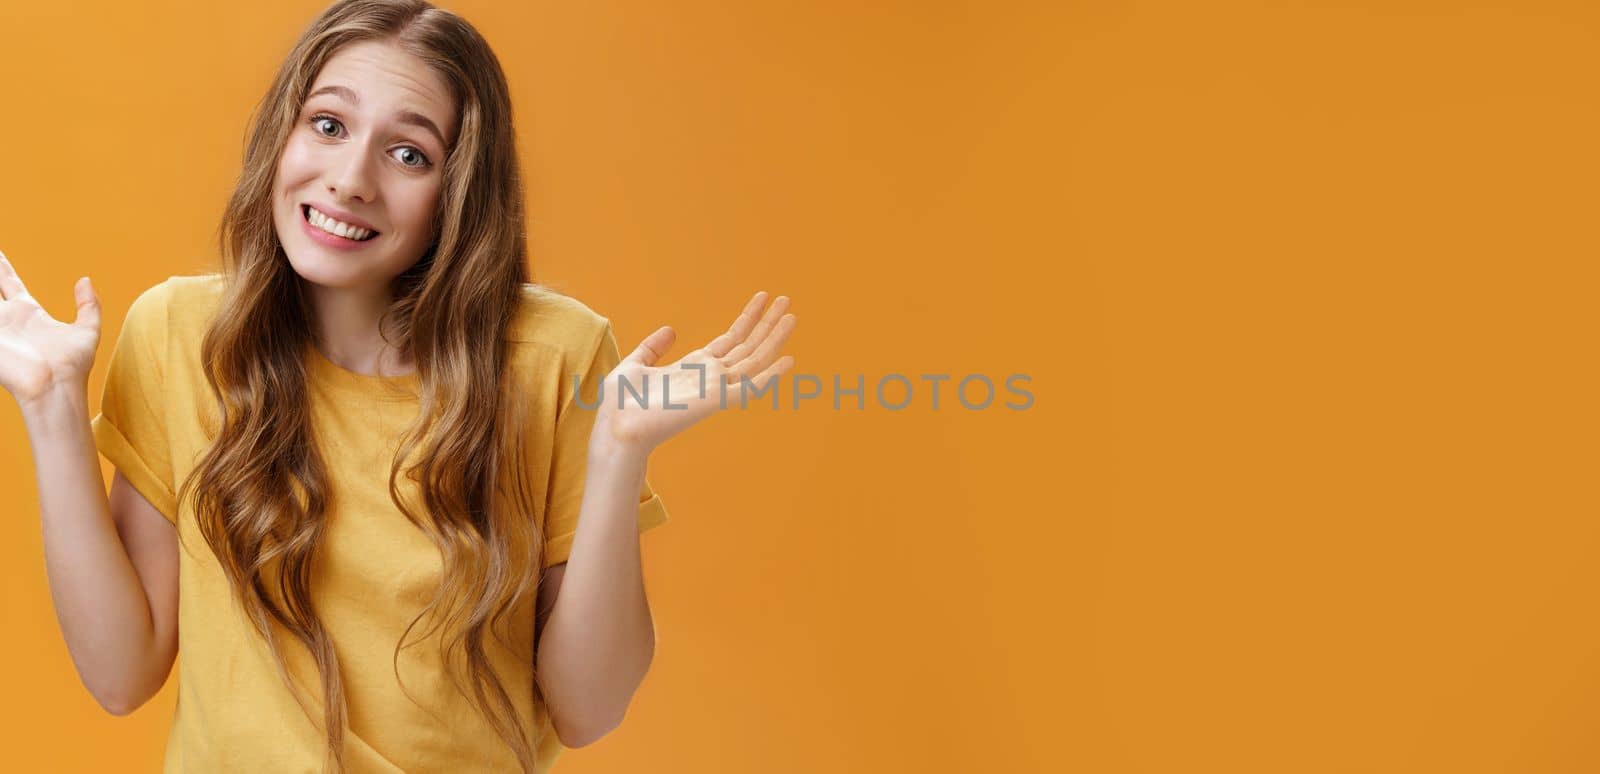 Girl stay out of business shrugging with hands raised and spread aside, silly sorry smile posing over orange background unaware and confused in casual t-shirt having no idea about topic.